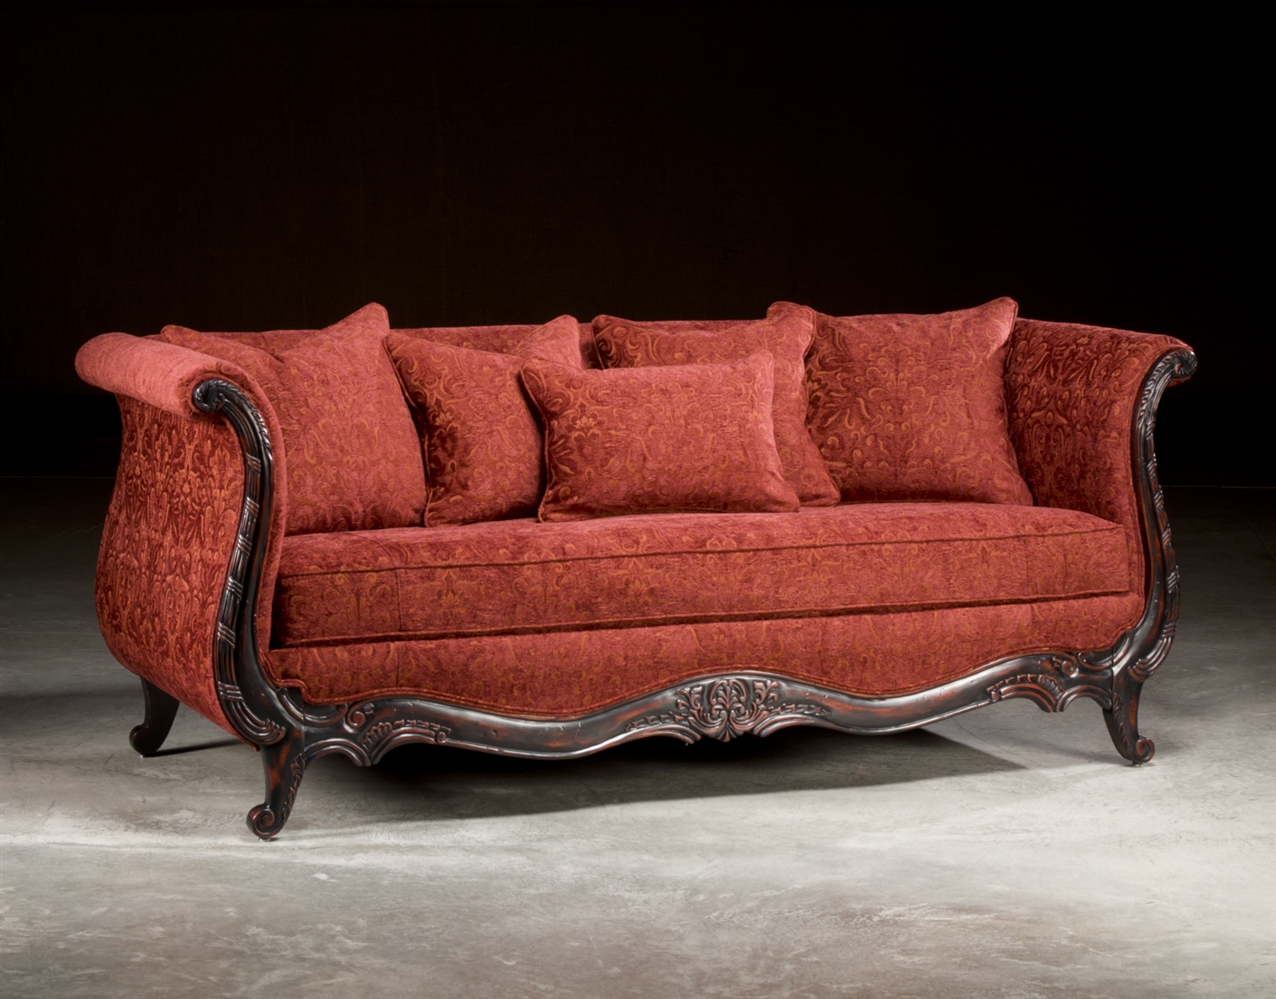 SOFA, COUCH & LOVESEAT Wood Frame Antique Red Sofa